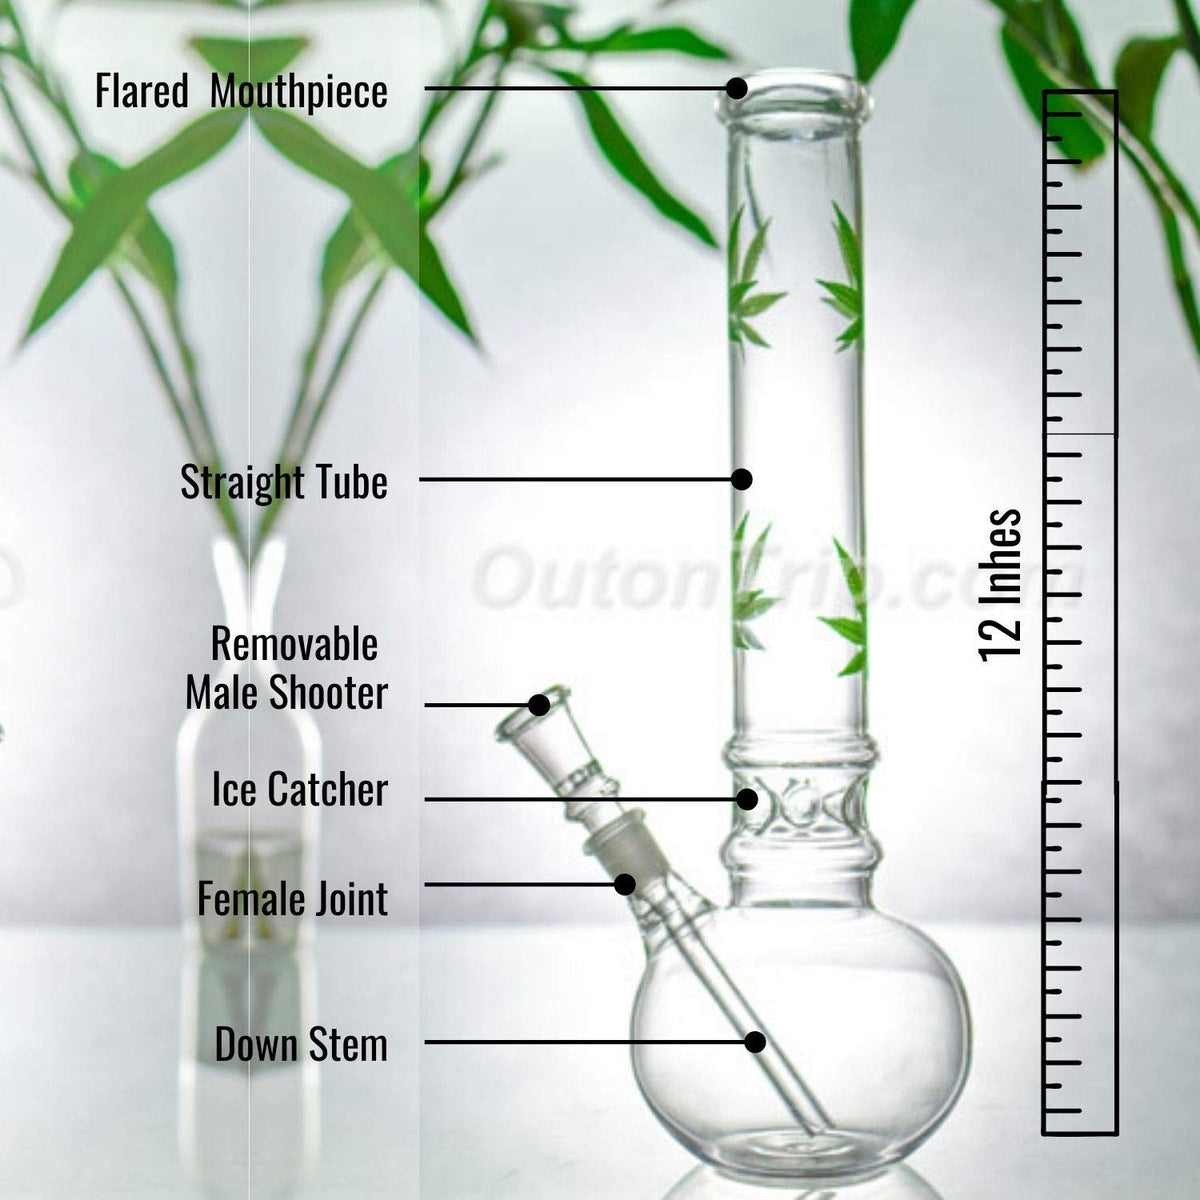 OutonTrip Leaf Bong Smoking Combo with Smoking Accessories (12 inch)